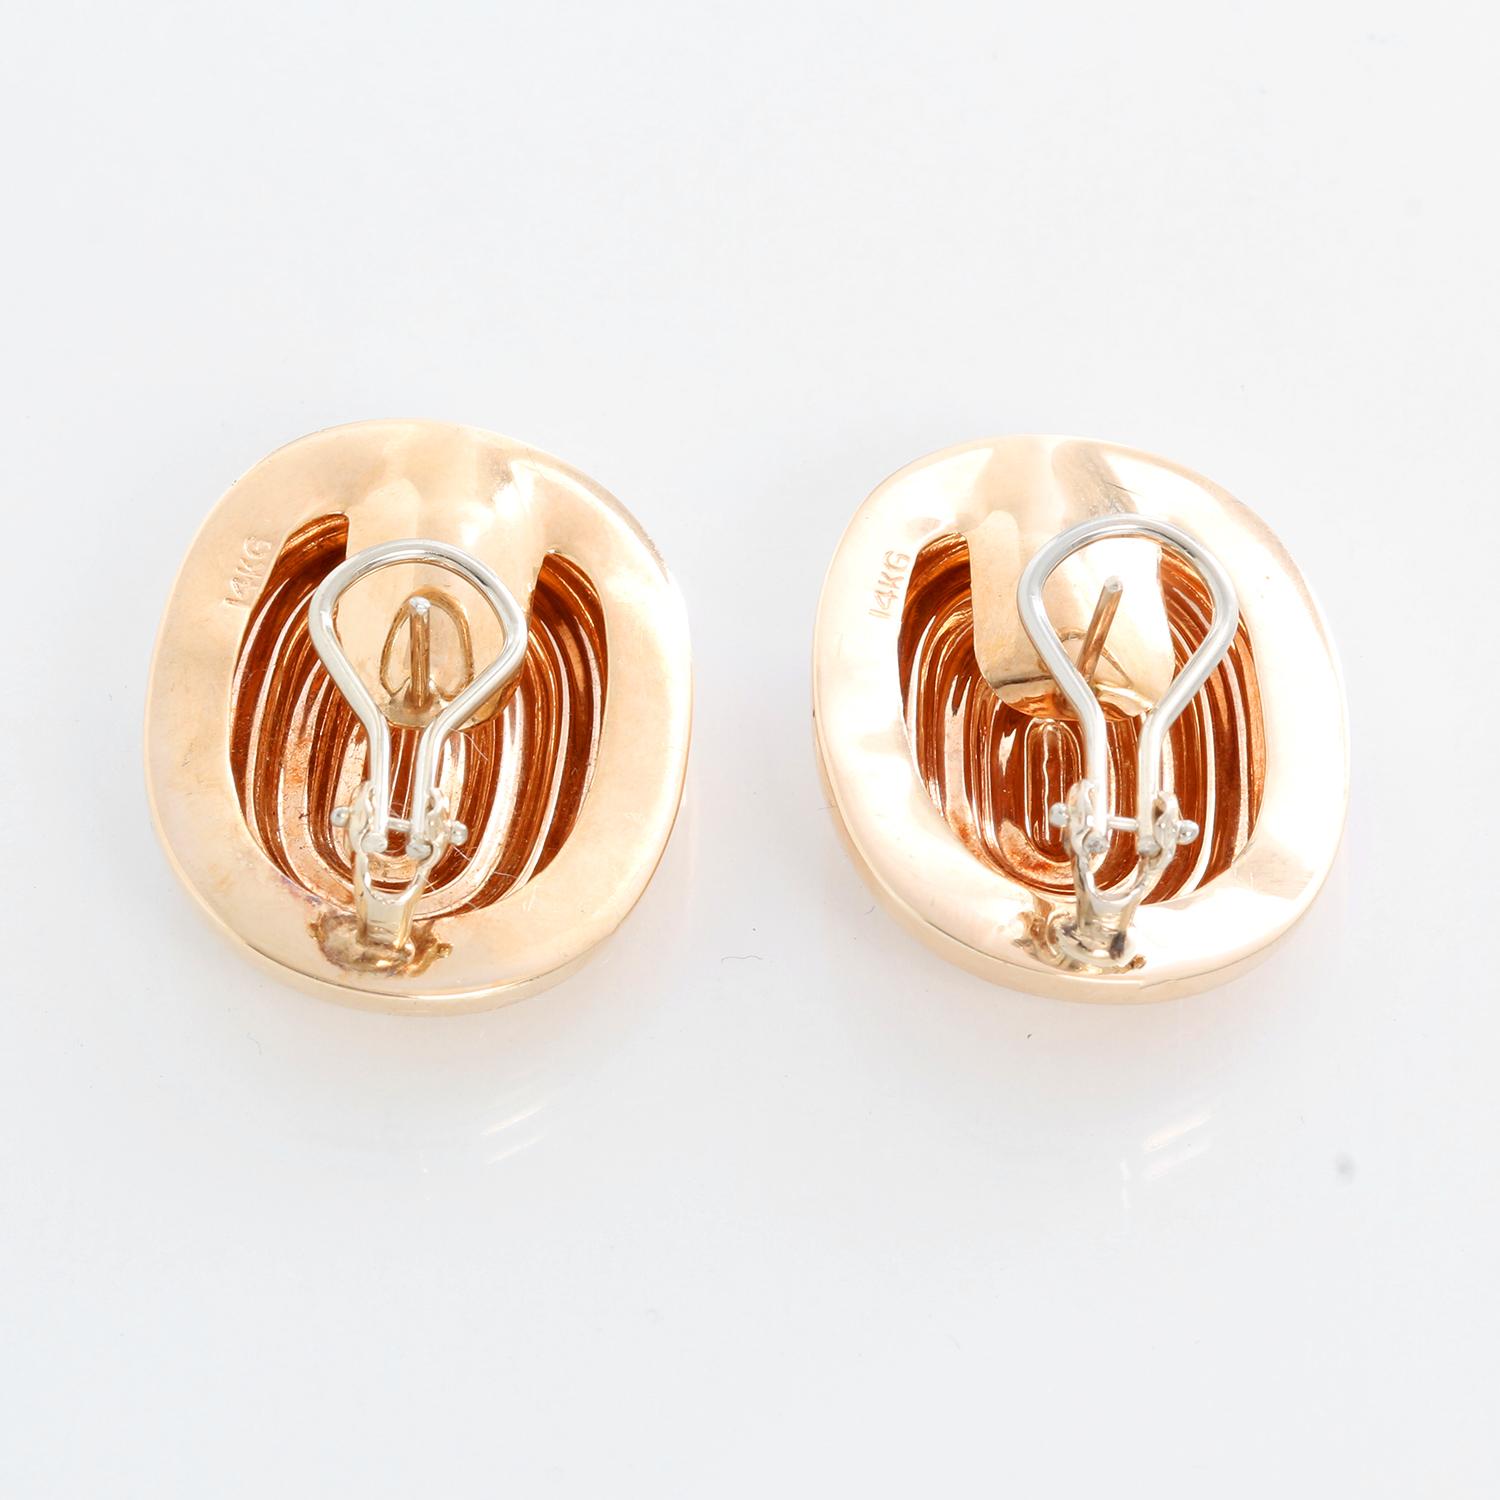 14K Yellow Gold Oval Swirl Earrings - 14K yellow gold ovals measuring 1 1/4 by 1 inch at their longest point. Total weight 8.9 grams. Have an omega clasp. Pre-owned with custom box.